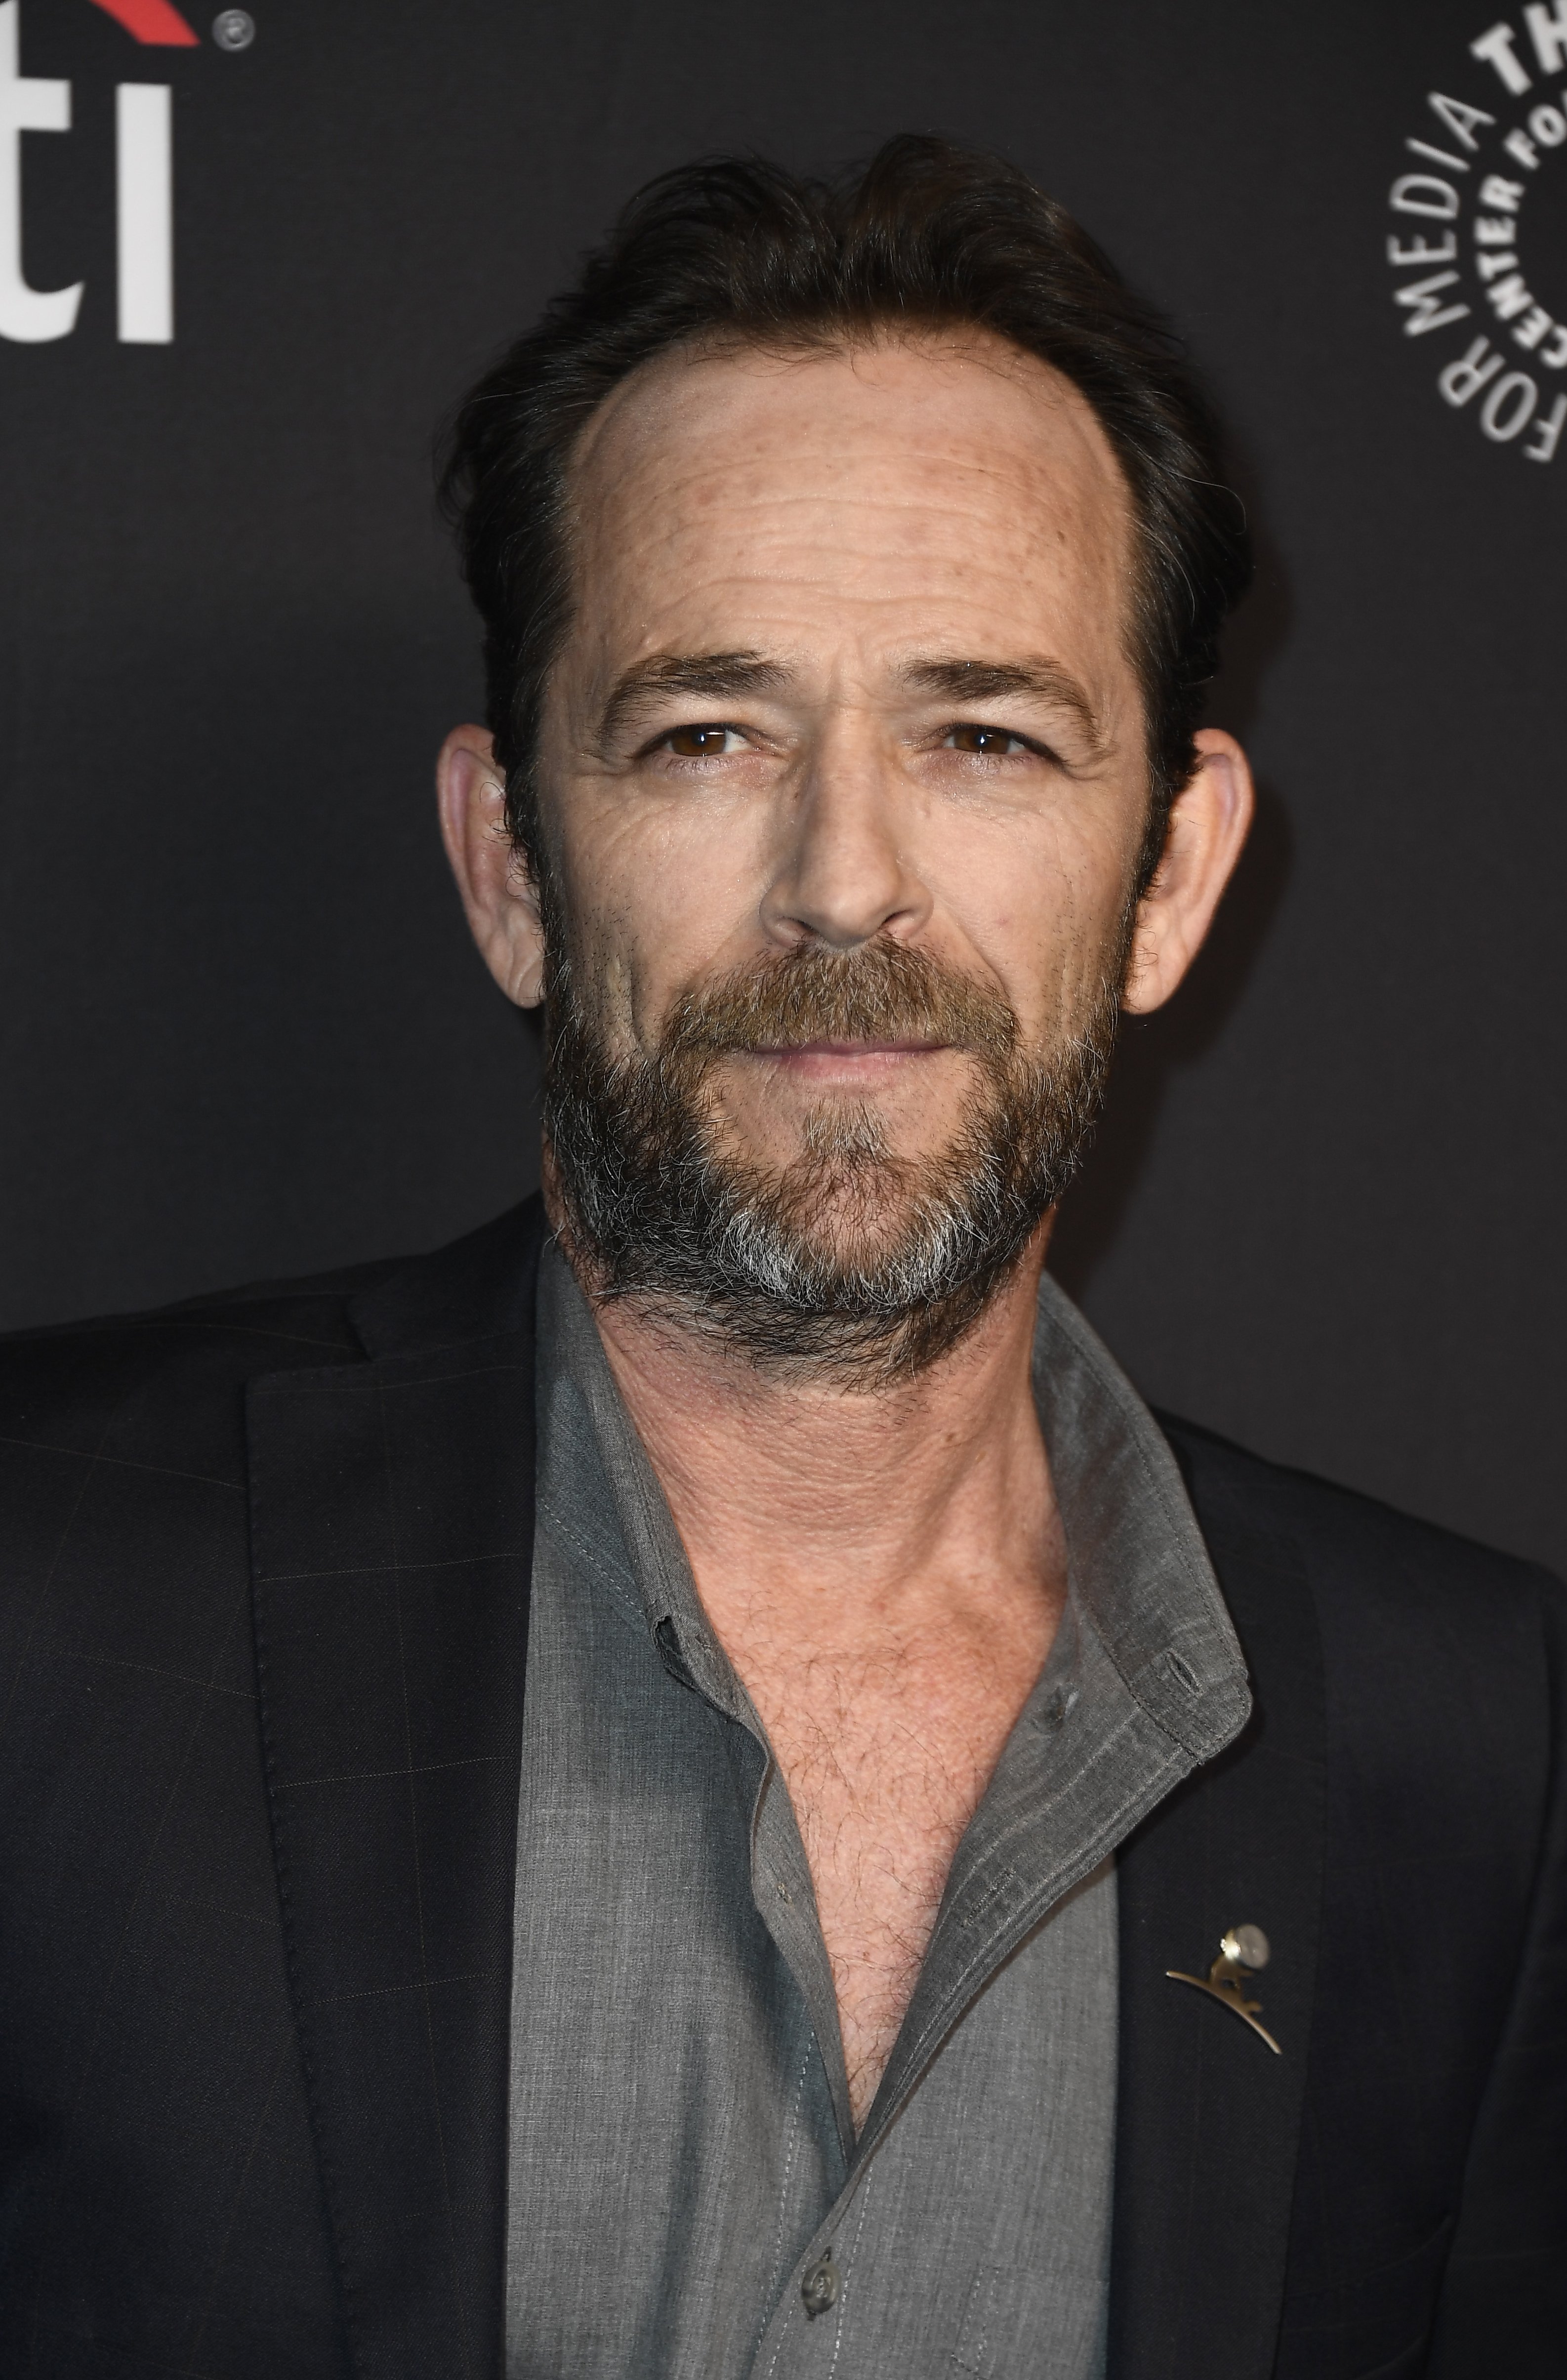 Luke Perry arrives for the 2018 PaleyFest in Los Angeles | Photo: Getty Images